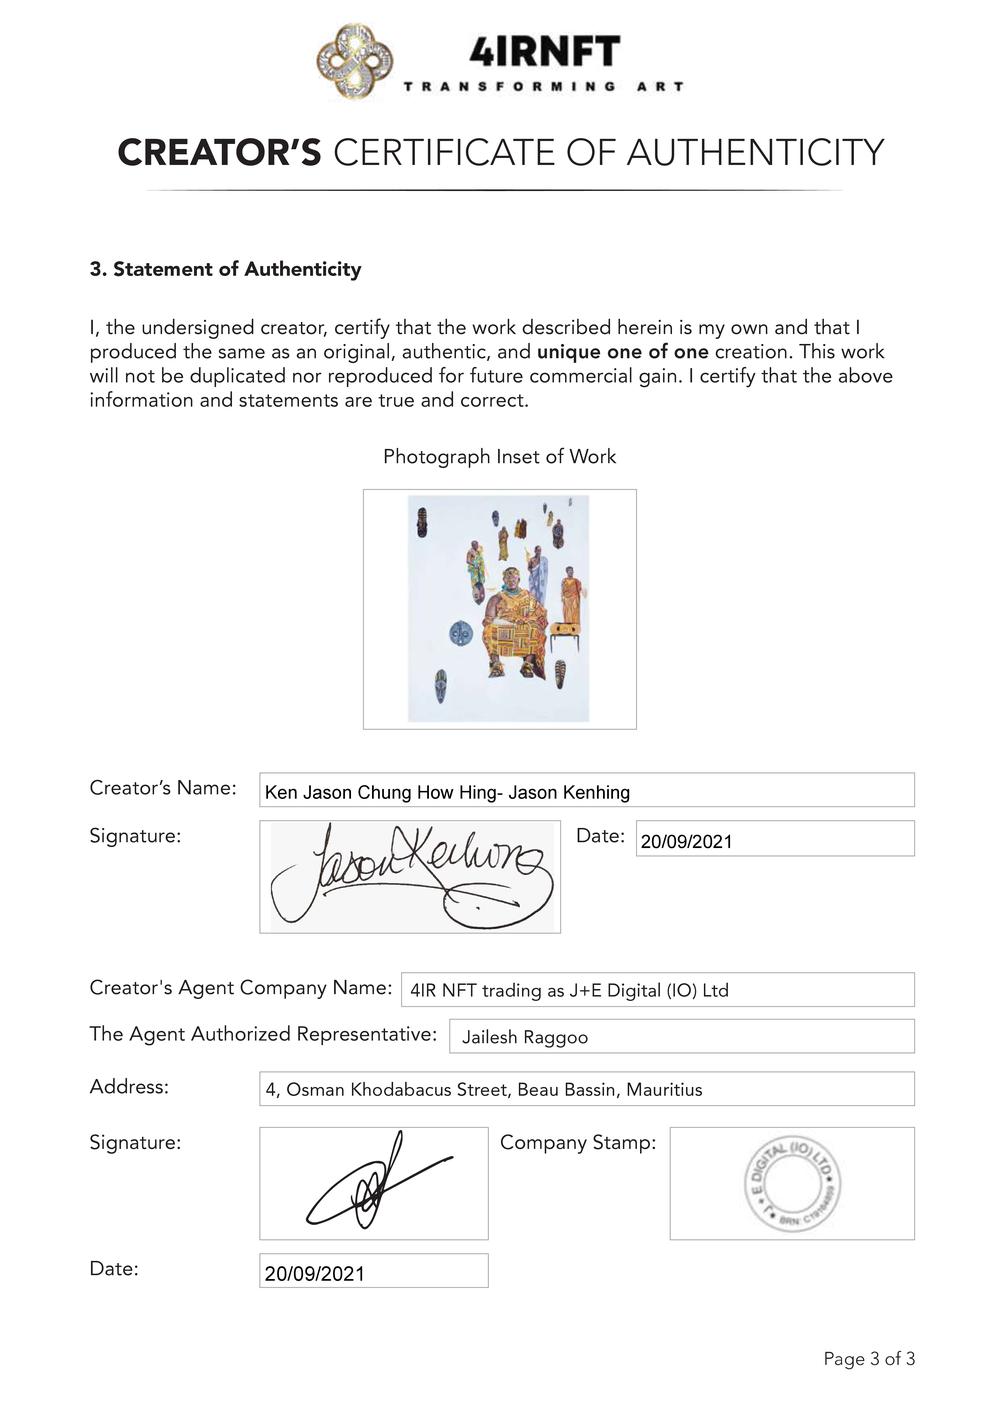 Certificate of Authenticity and Consignment - Past Present Future.pdf